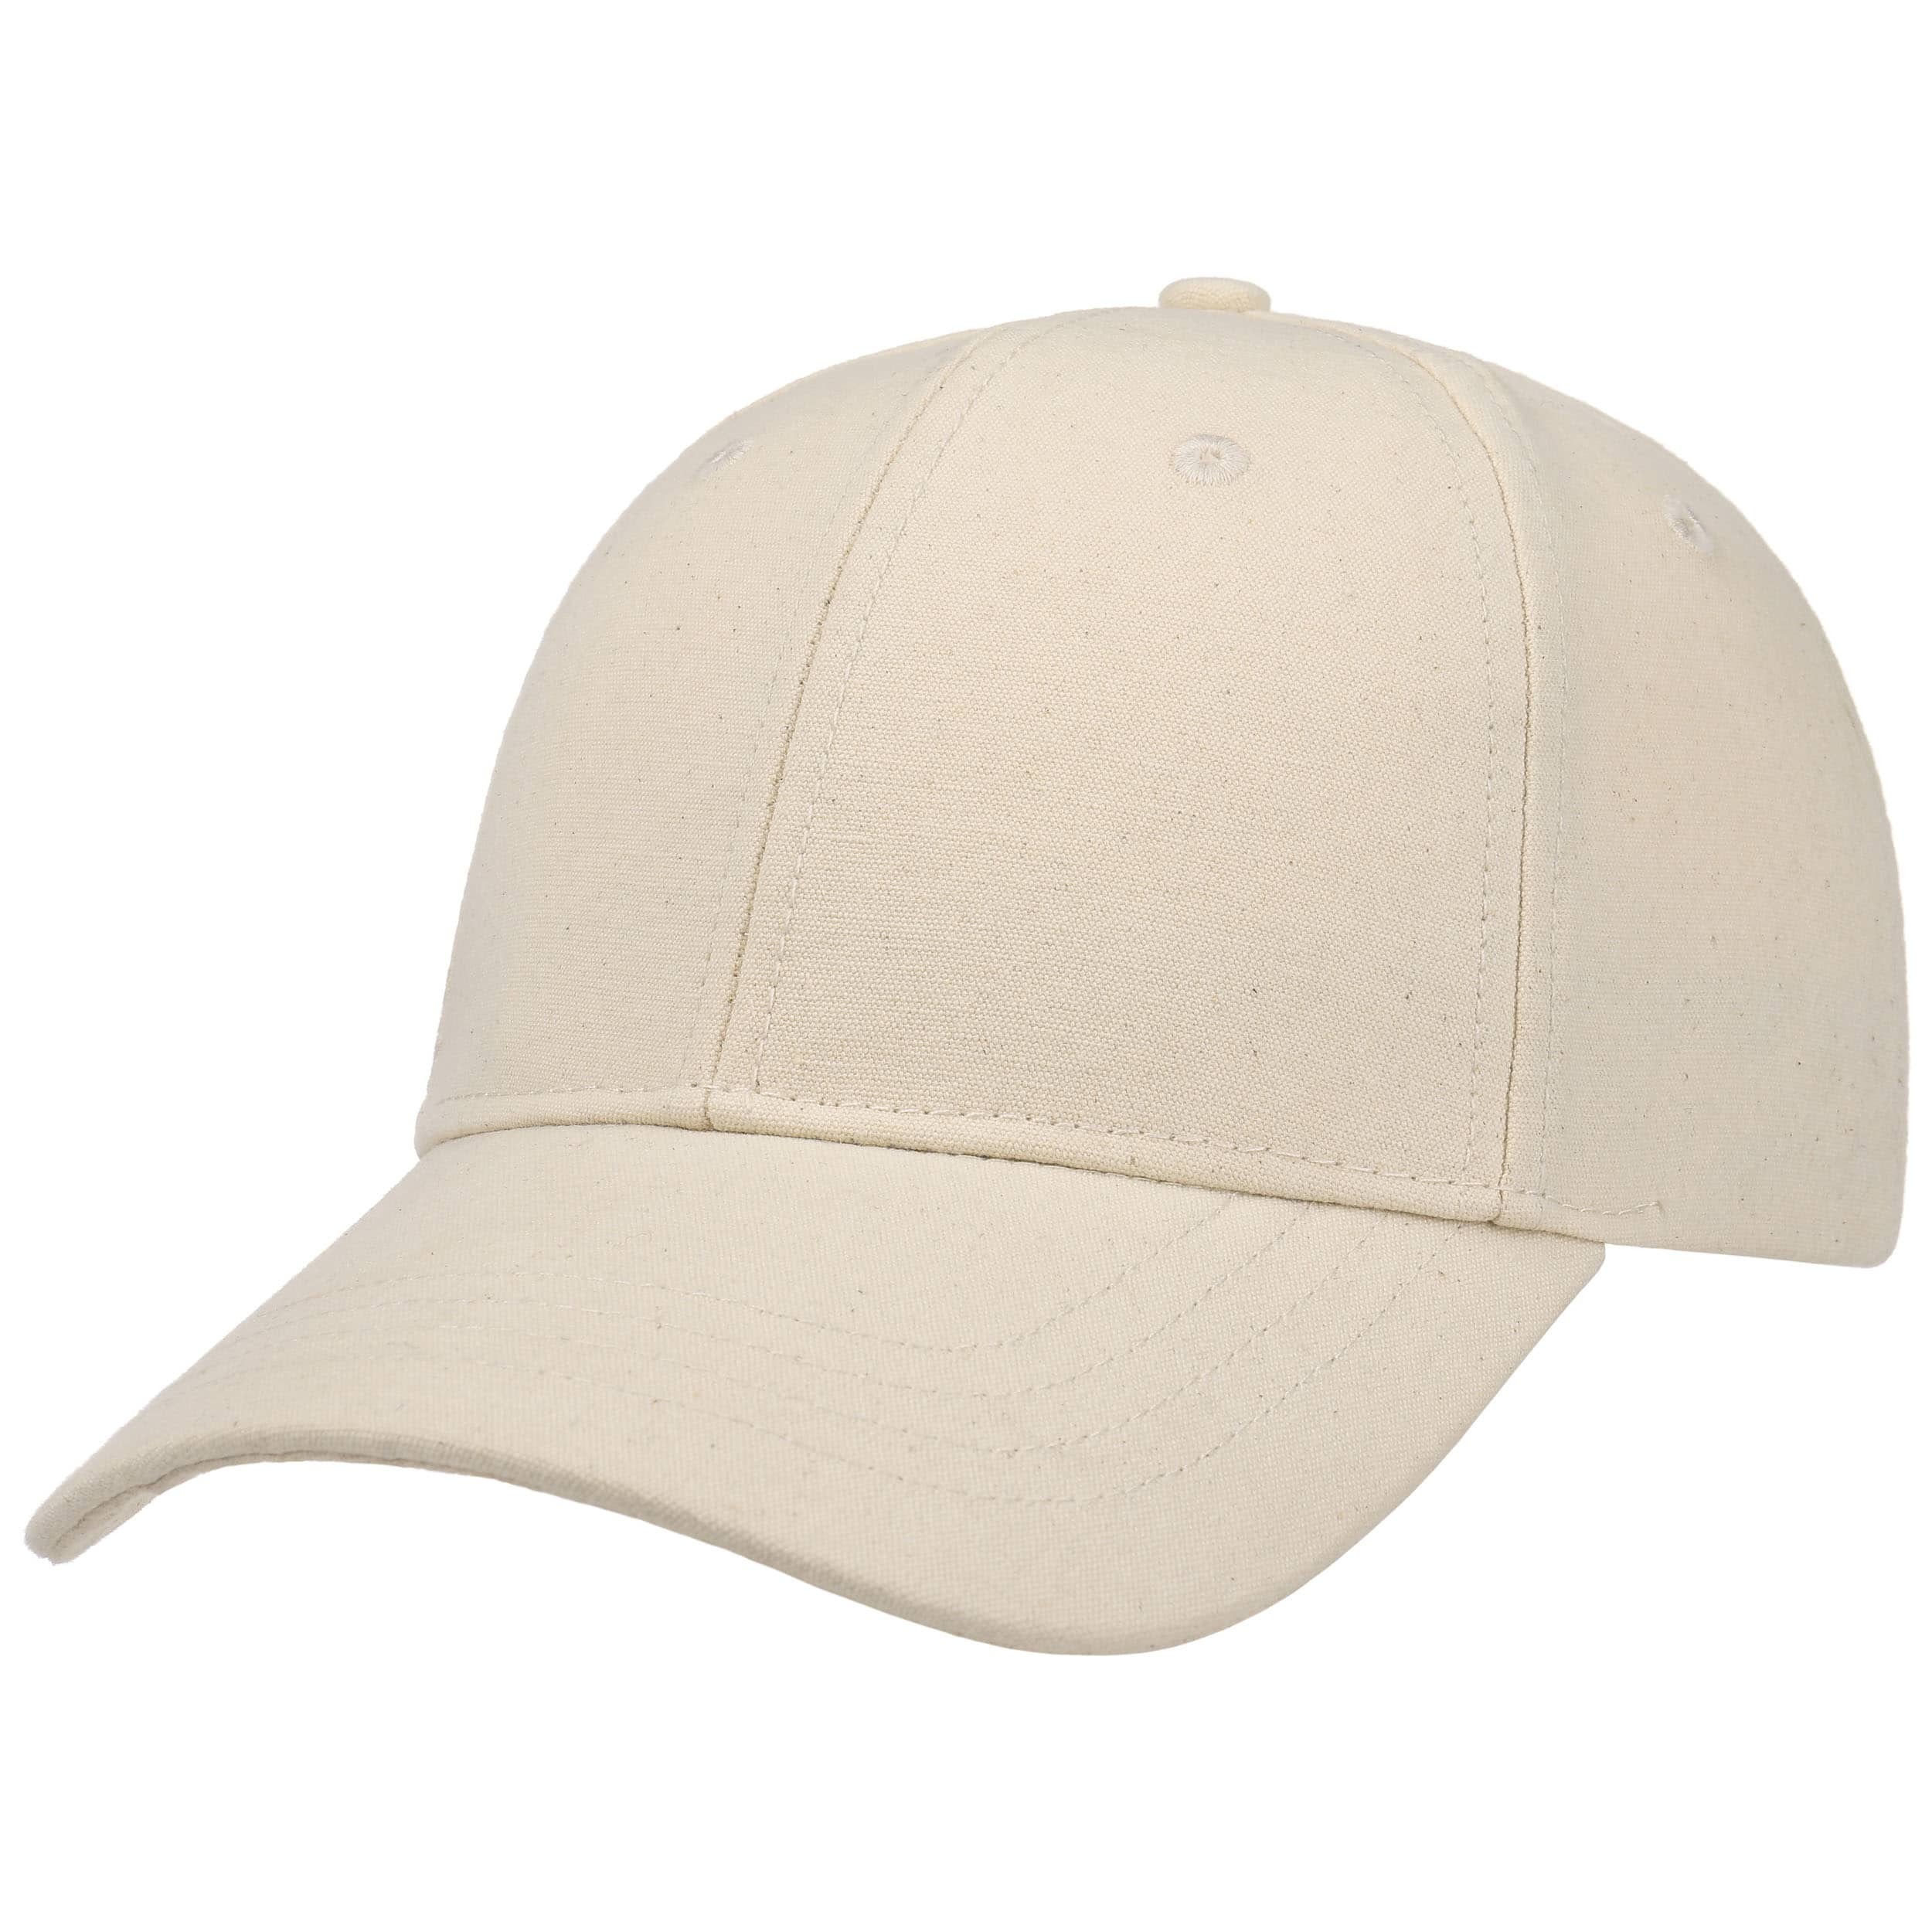 Classic Canvas Cap with UV Protection by Stetson --/u003e Shop Hats, Beanies and Caps online ▷ Hatshopping